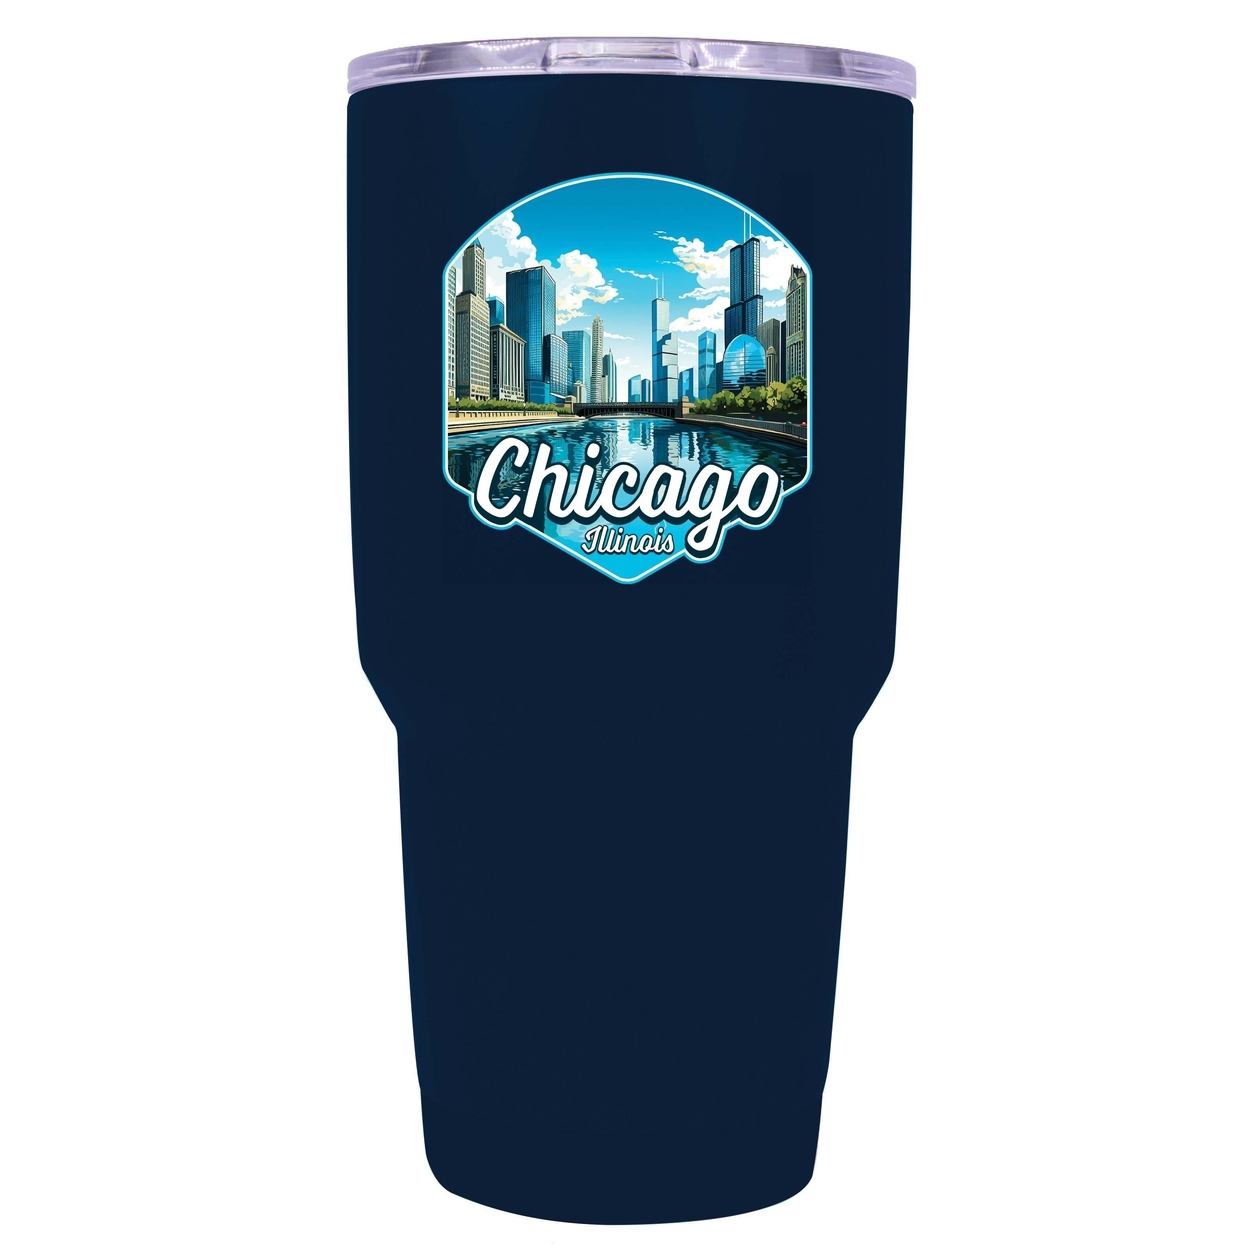 Chicago Illinois A Souvenir 24 Oz Insulated Tumbler - Stainless Steel,,2-Pack